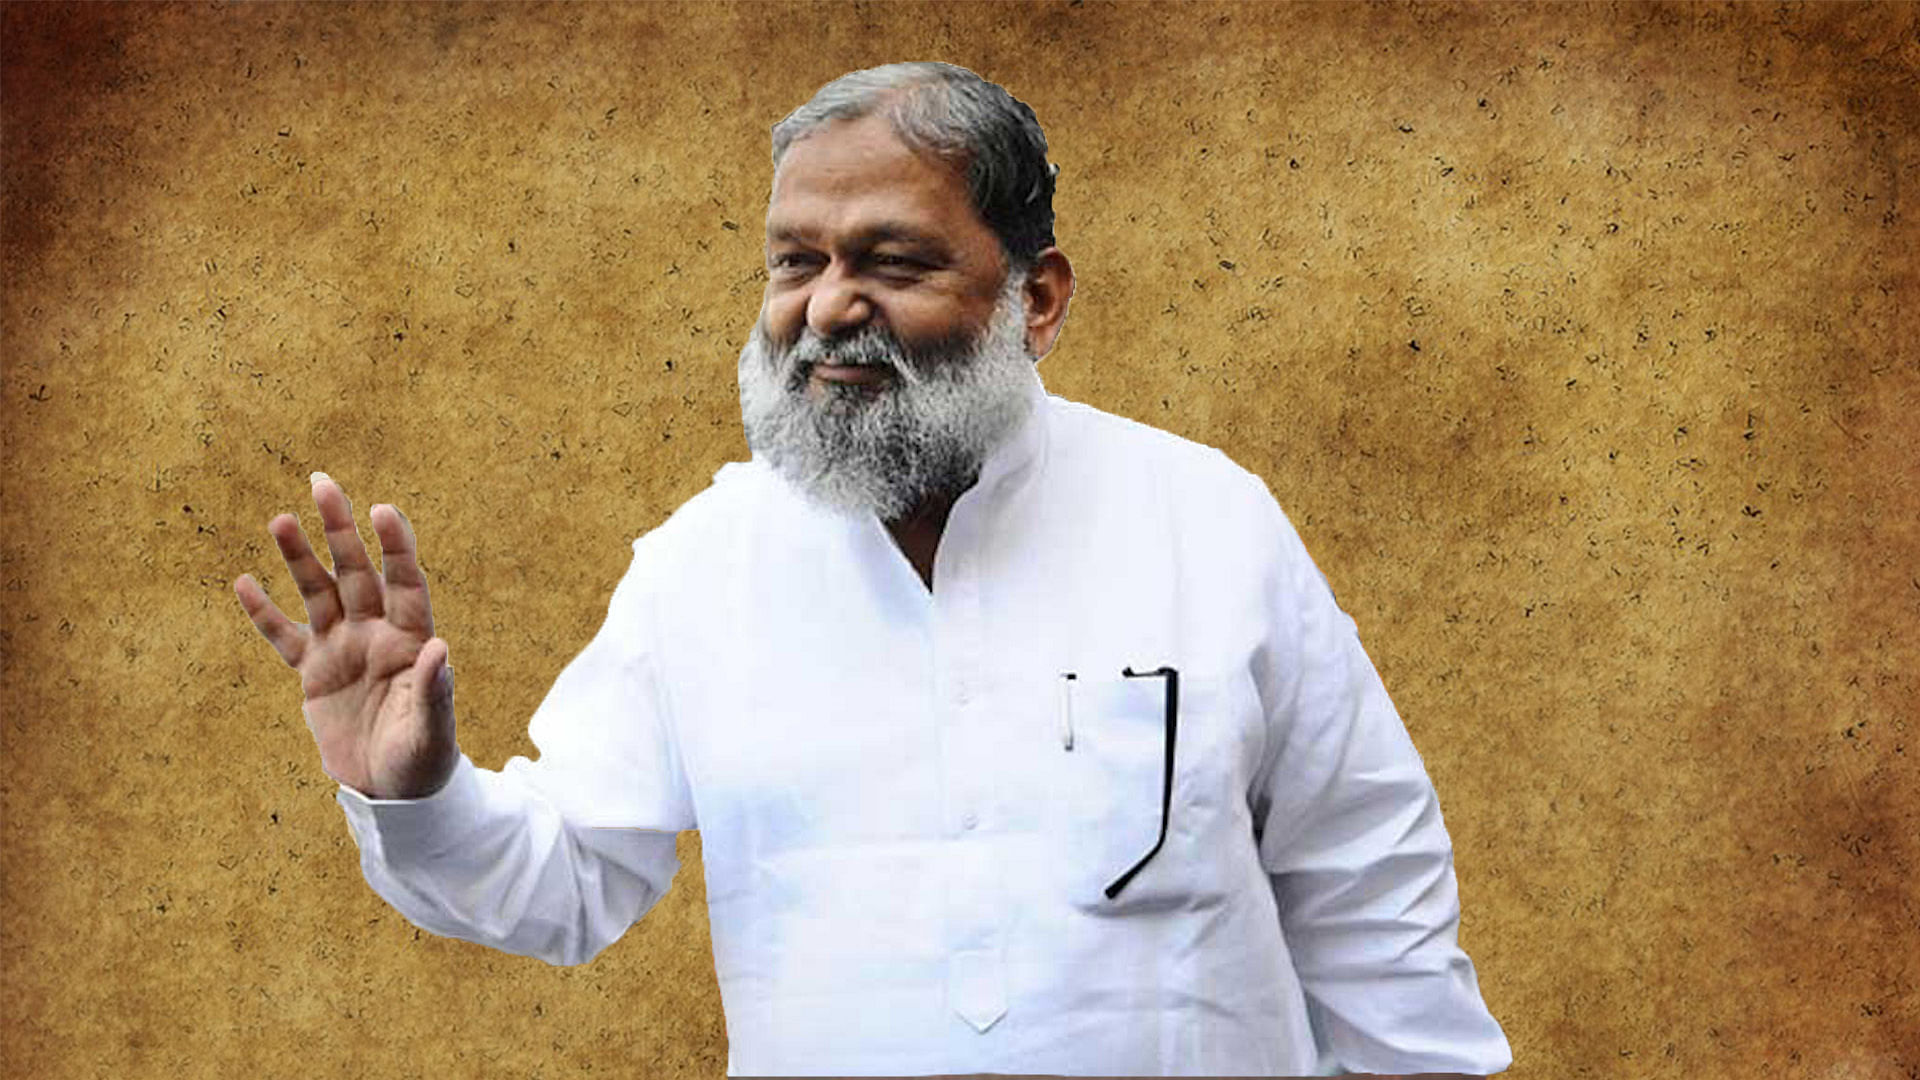 Anil Vij is Haryana’s Sports Minister who has now demanded an apology from Manu Bhaker for her ‘jumla’ tweet.